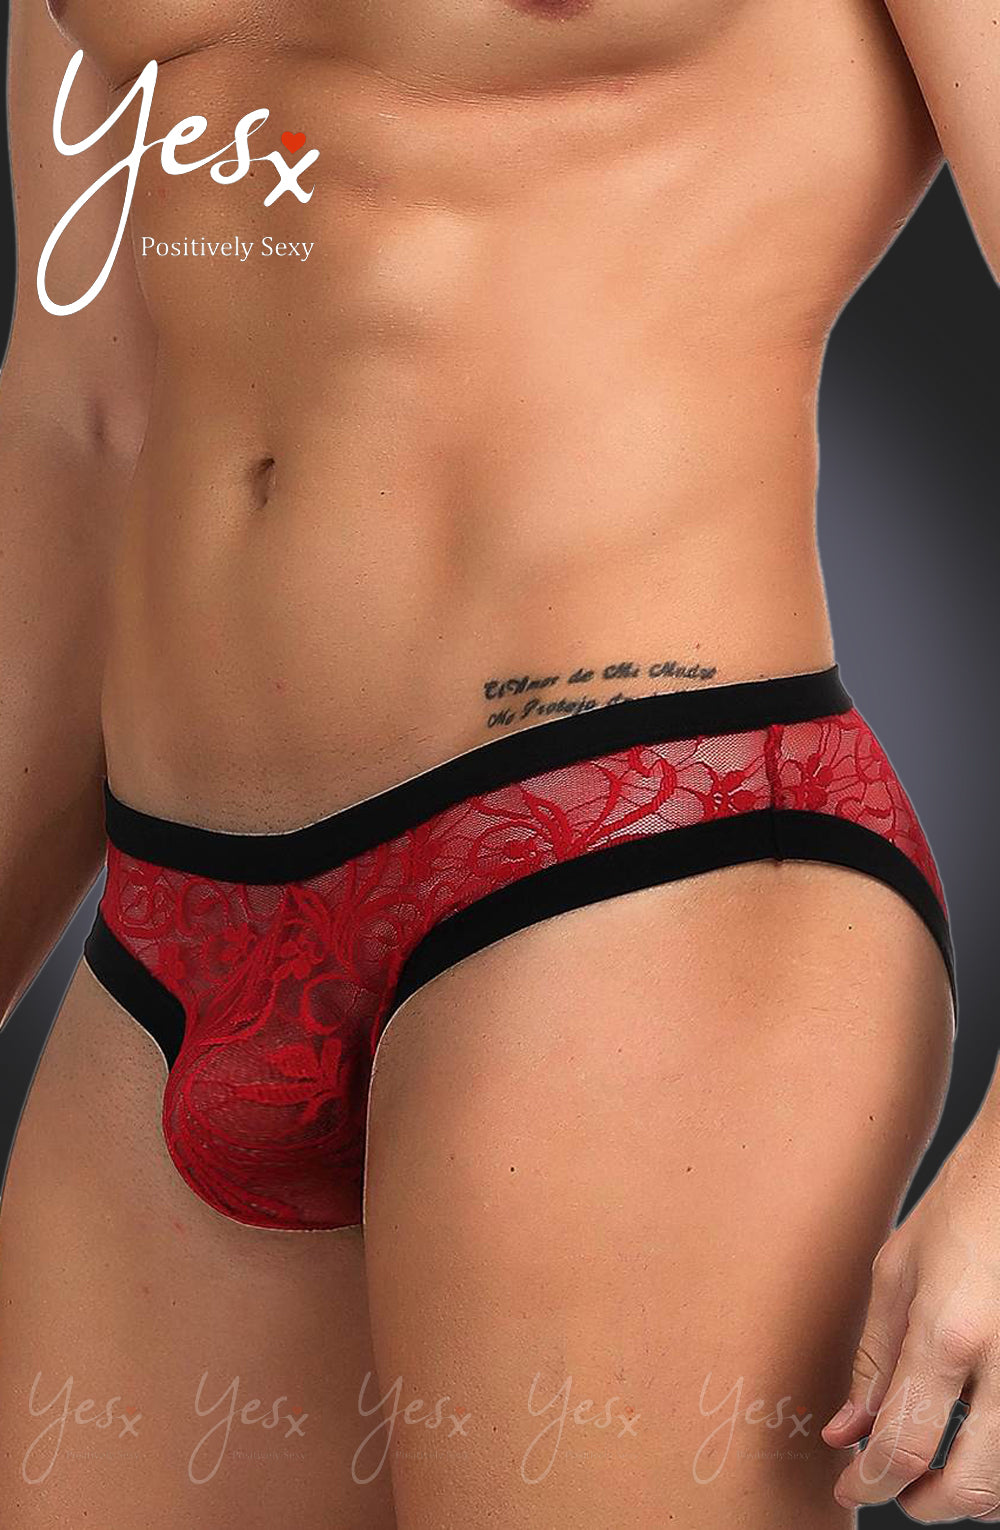 Vibrators, Sex Toy Kits and Sex Toys at Cloud9Adults - YesX YX974 Men's Brief Red/Black - Buy Sex Toys Online